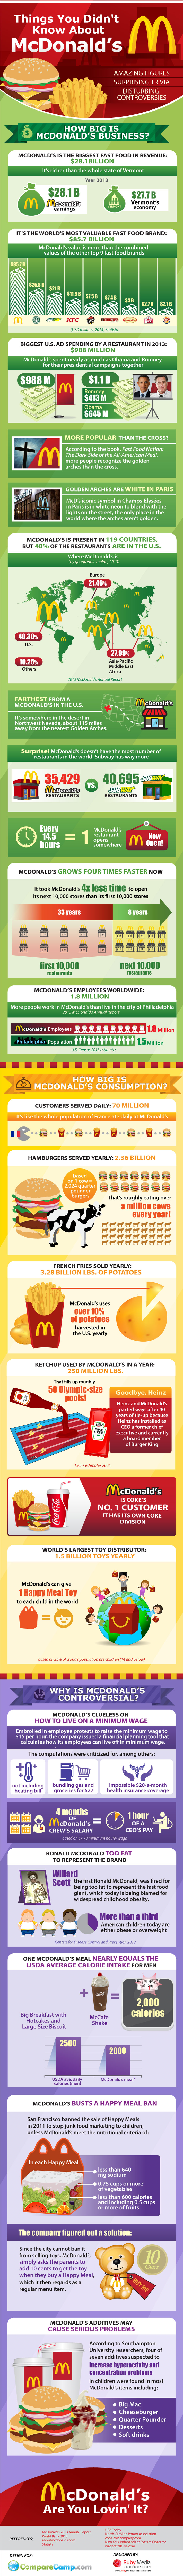 Things You Didn't Know About McDonald's